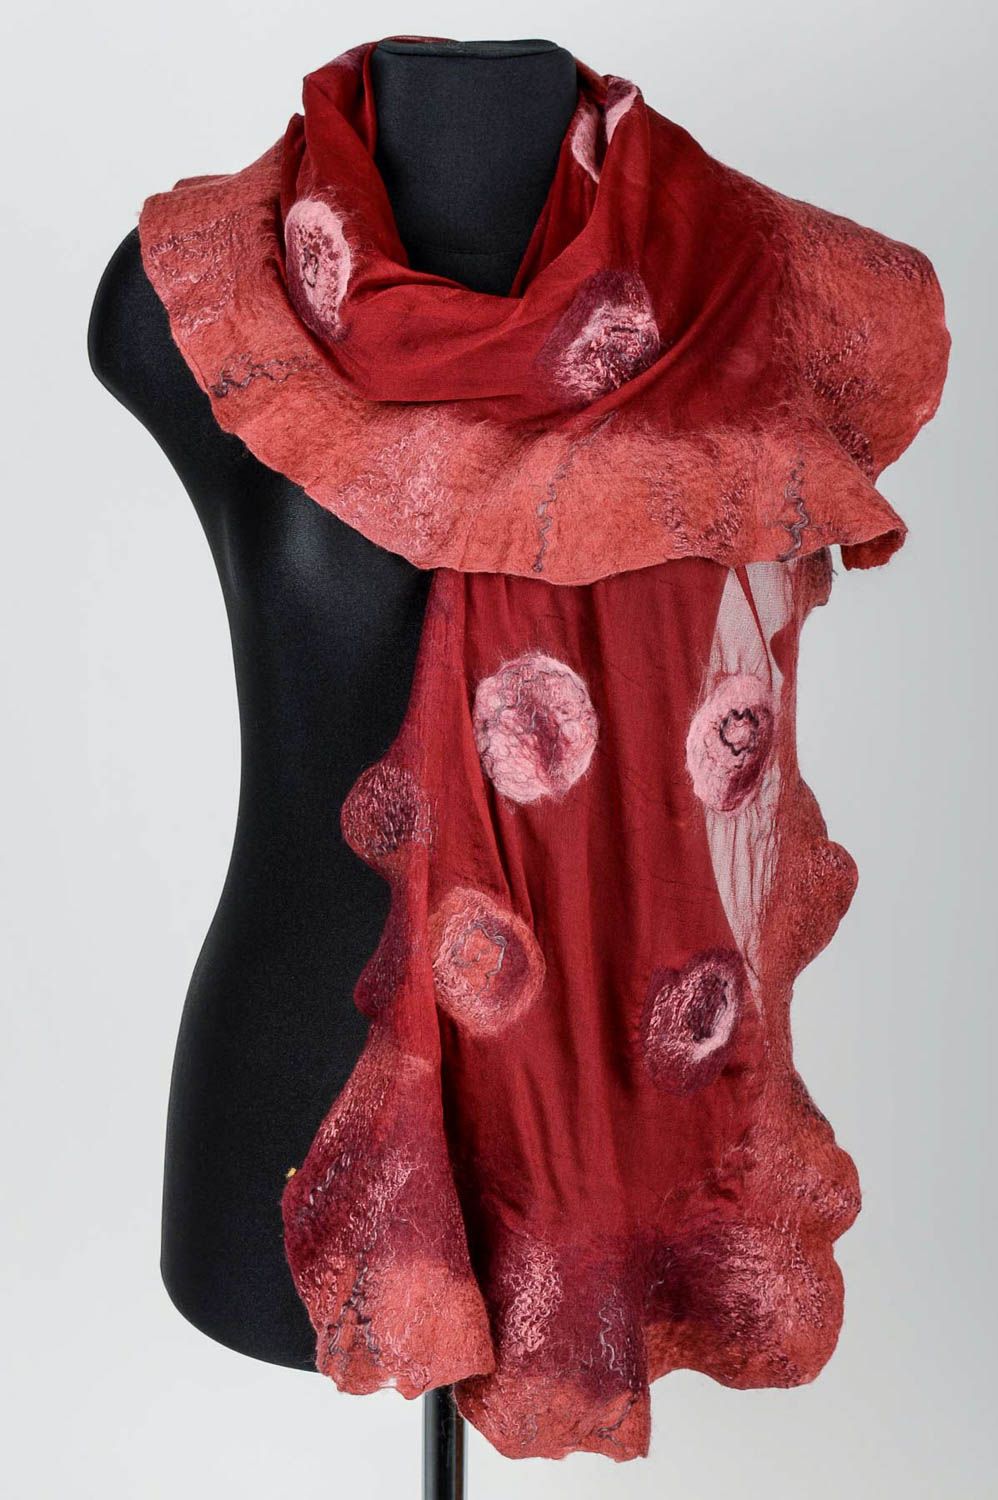 Handmade vinous scarf stylish female accessory red beautiful scarf gift for her photo 1